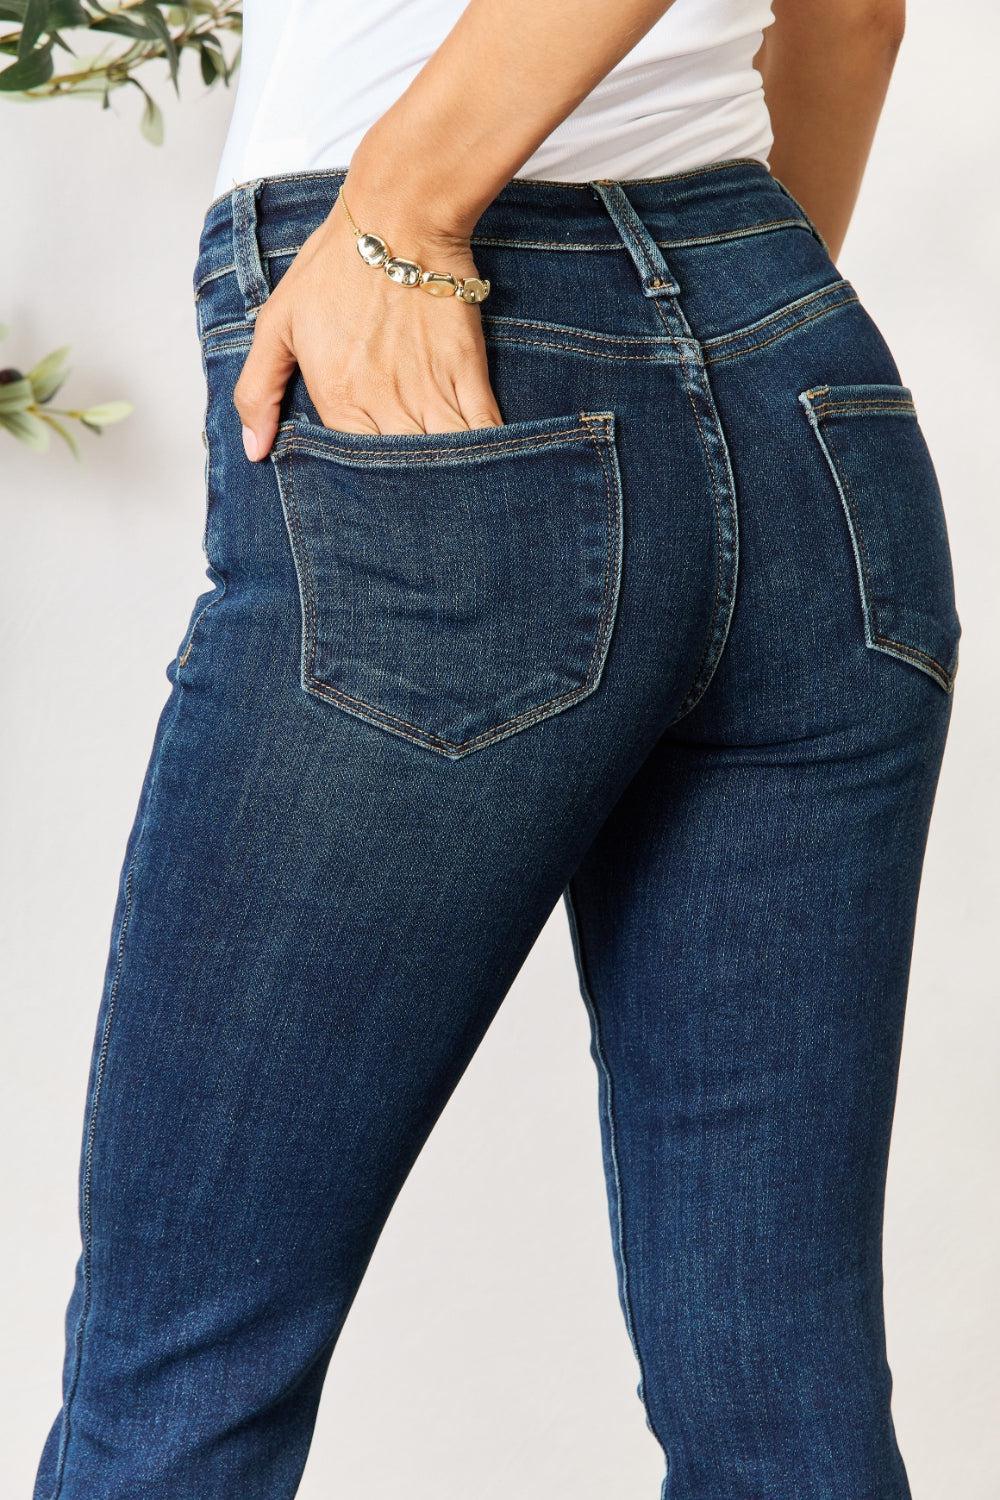 a woman in jeans with her hand in her pocket